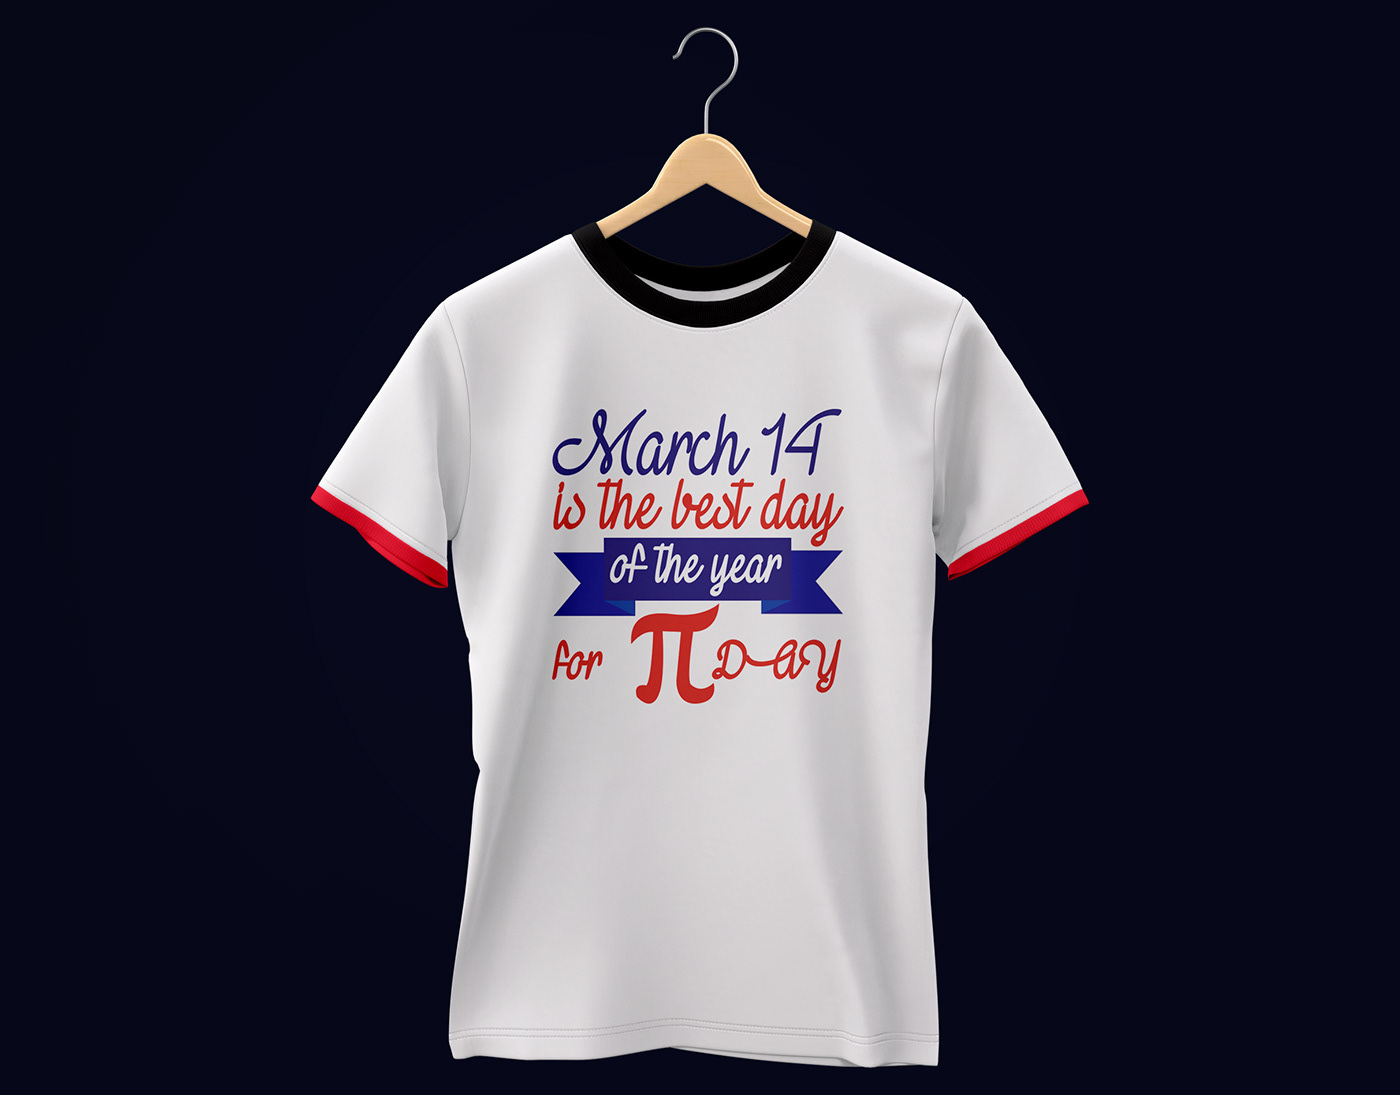 Clothing Fashion  happy Photography  pi day t shirt design t-shirt Tshirt Design Typography T shirt Design Vintage Design woman